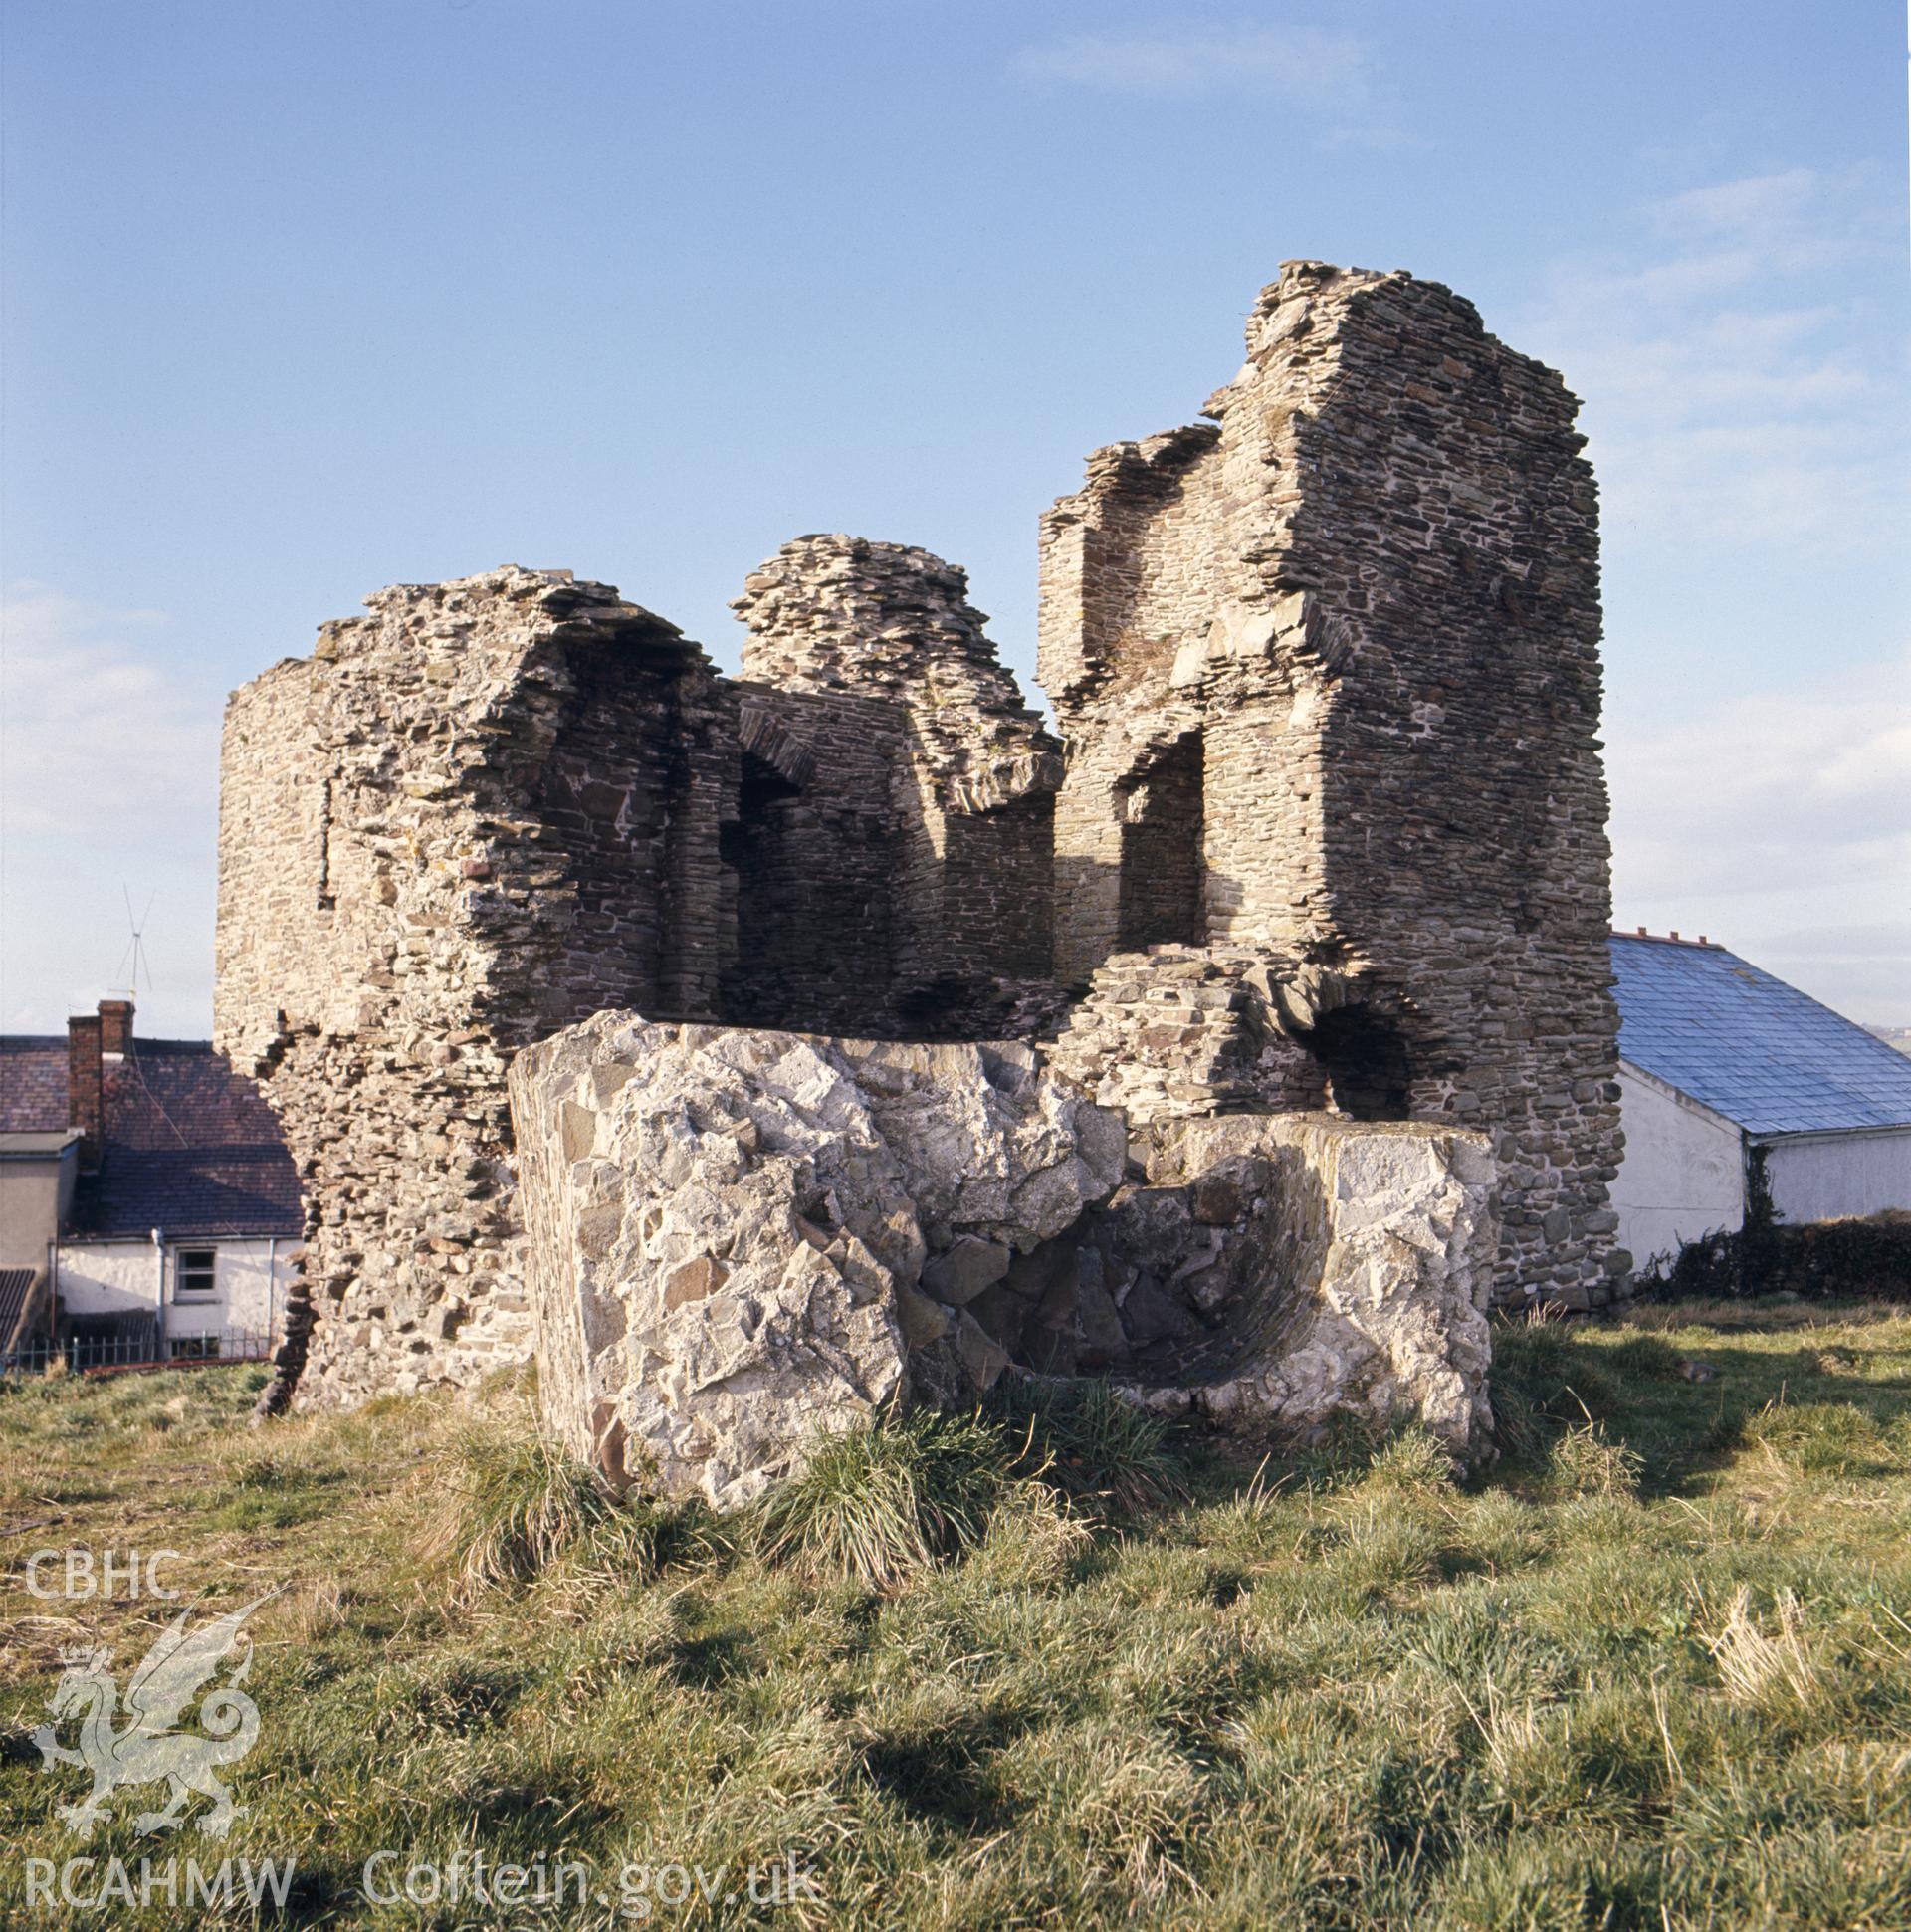 1 colour transparency showing view of Loughor castle; collated by the former Central Office of Information.